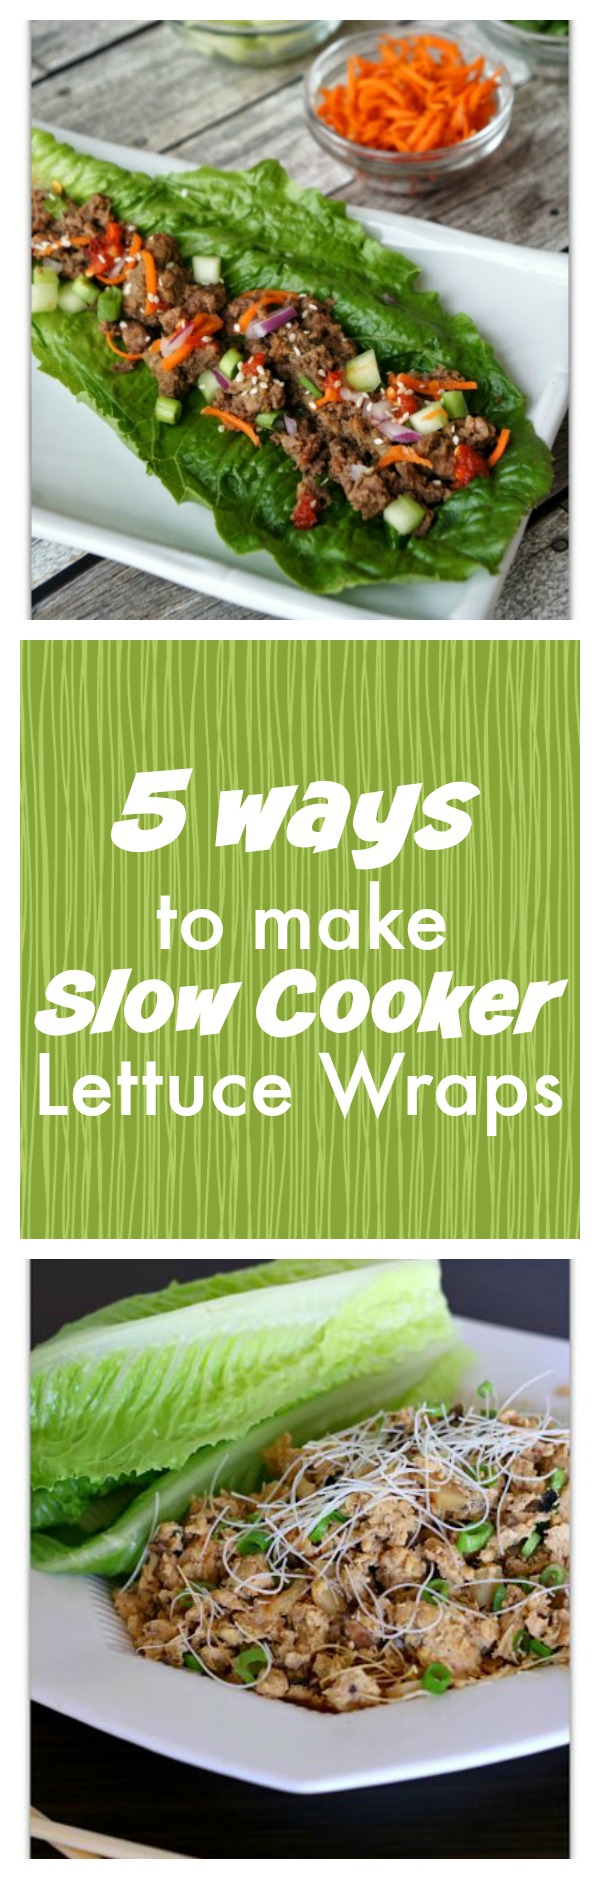 5 ways to make easy and healthy slow cooker lettuce wraps